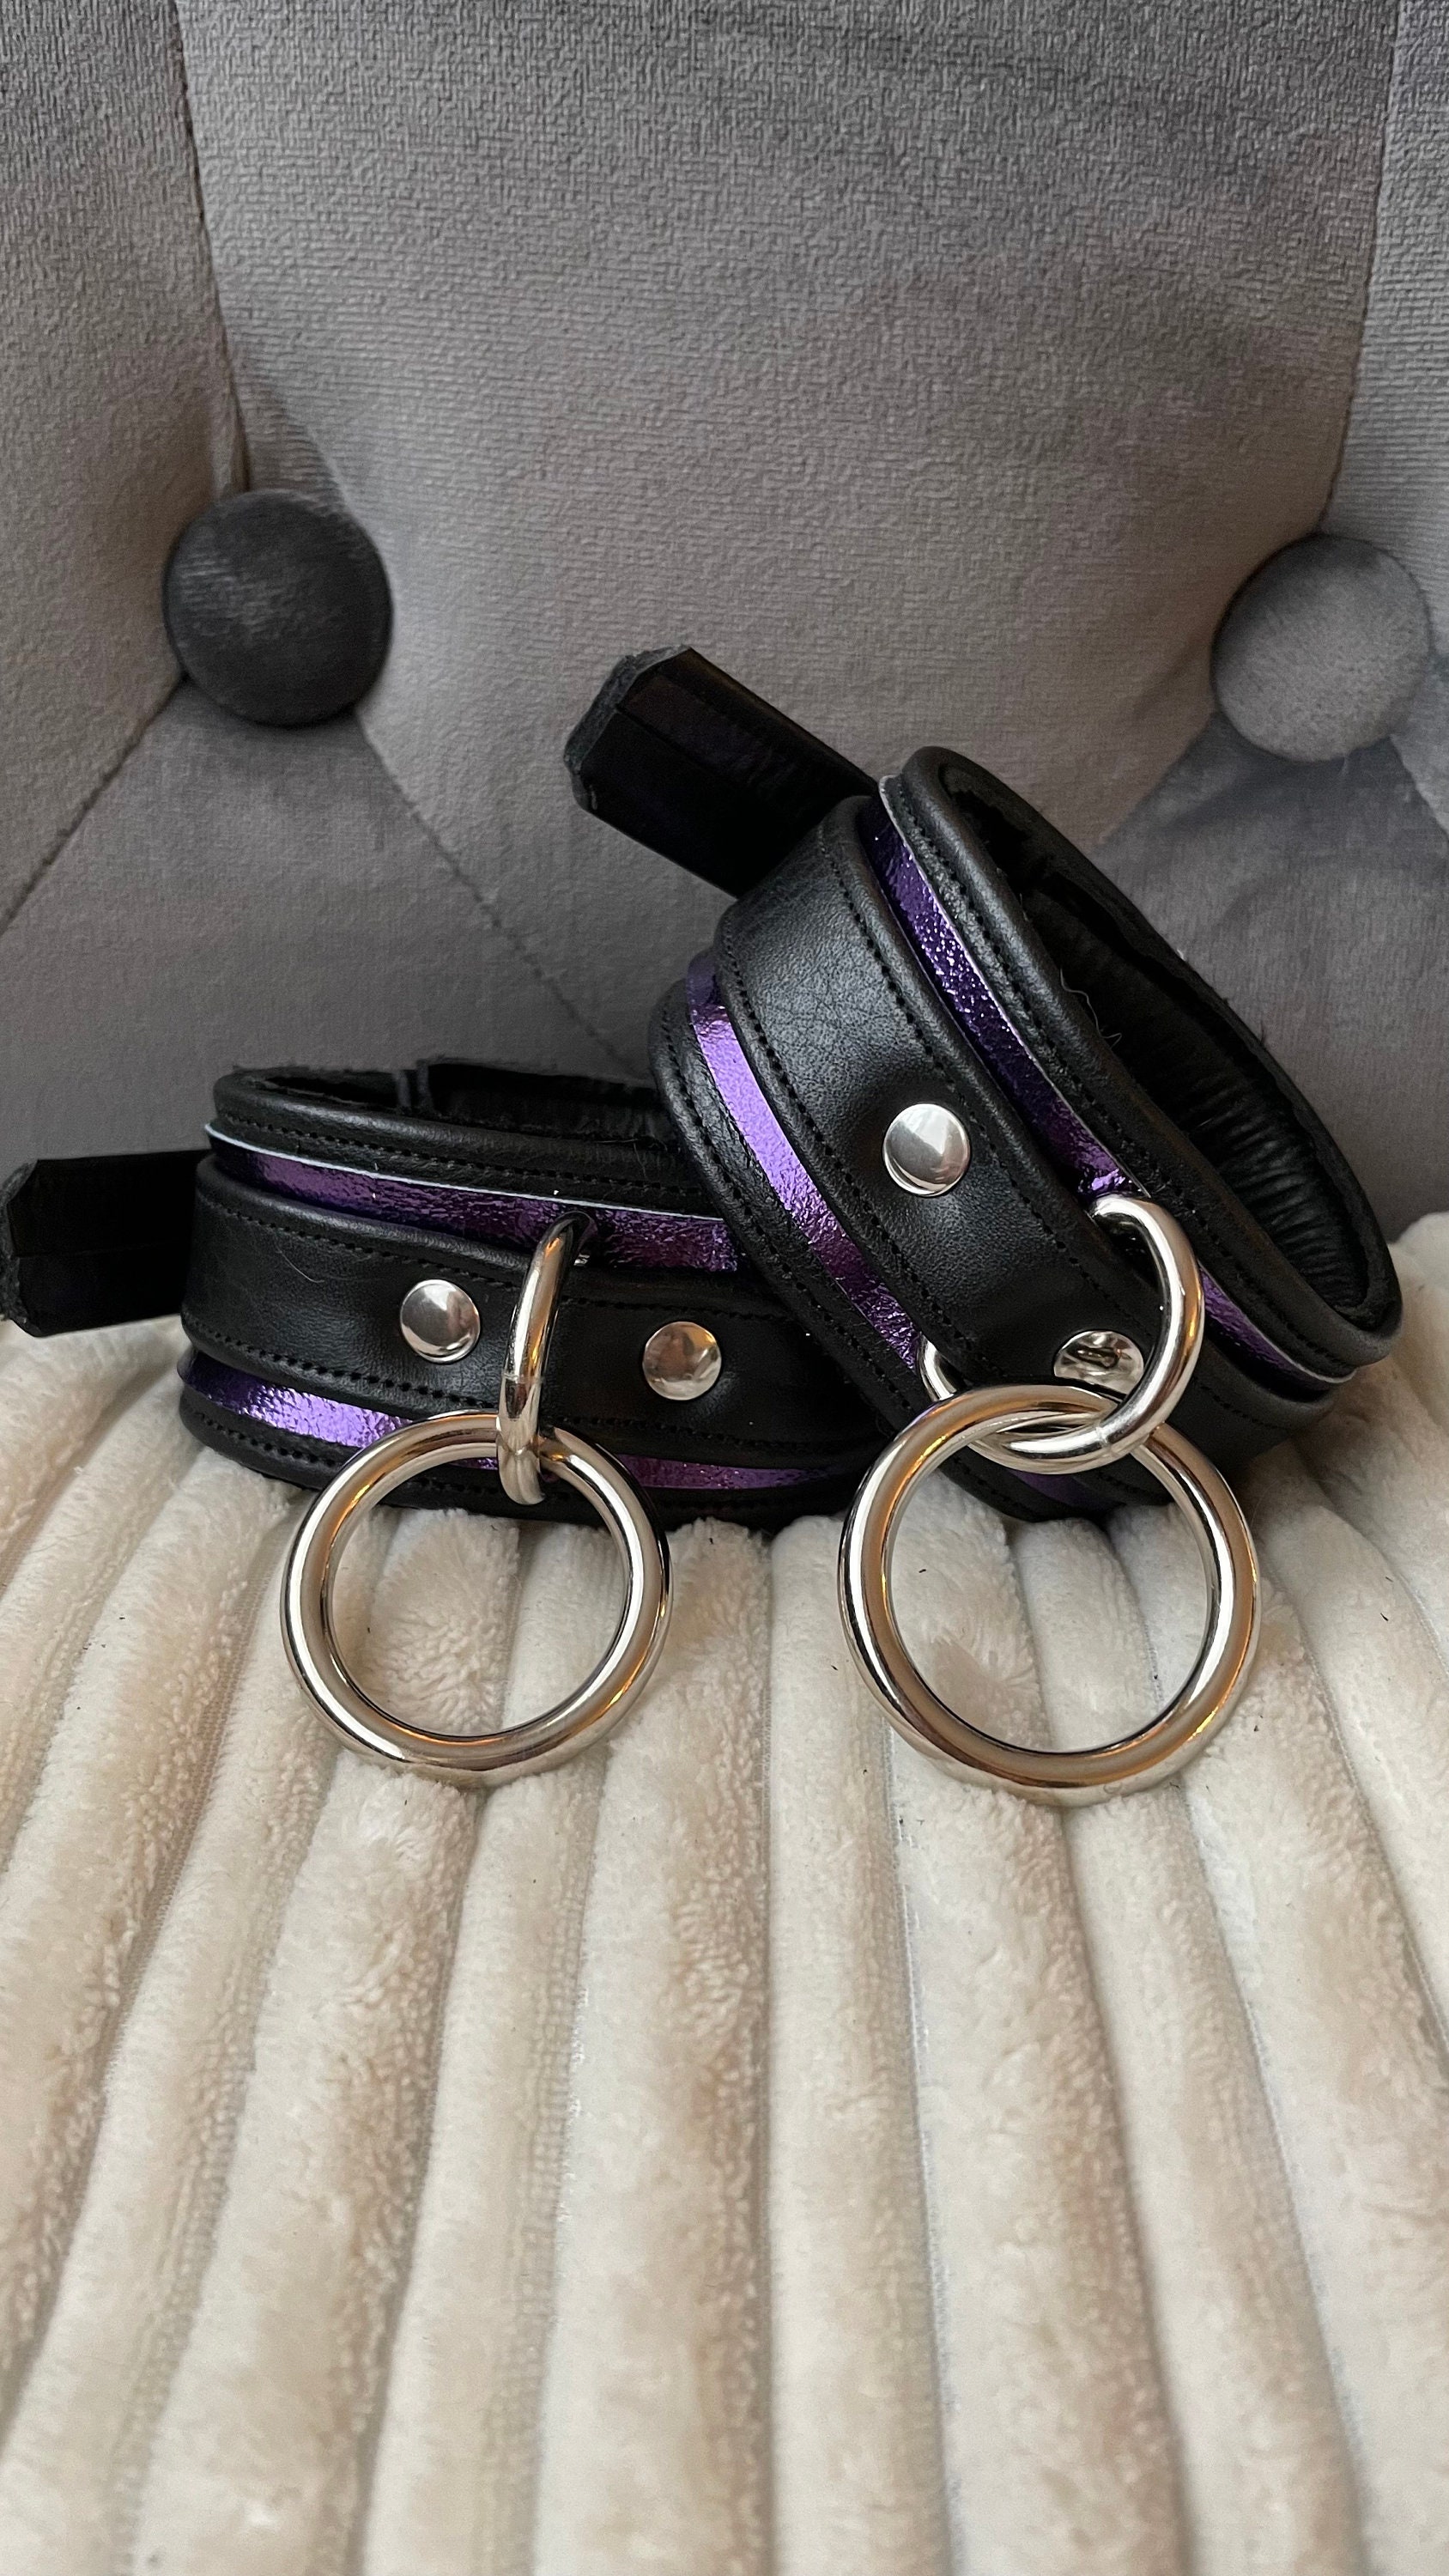 8-piece set Role Play handcuffs Whip adult sex toys purple bell knot  decoration, cute sexy toys 8-piece role play handcuffs adult sex toys  purple bell knot decoration, women's cute sexy toys